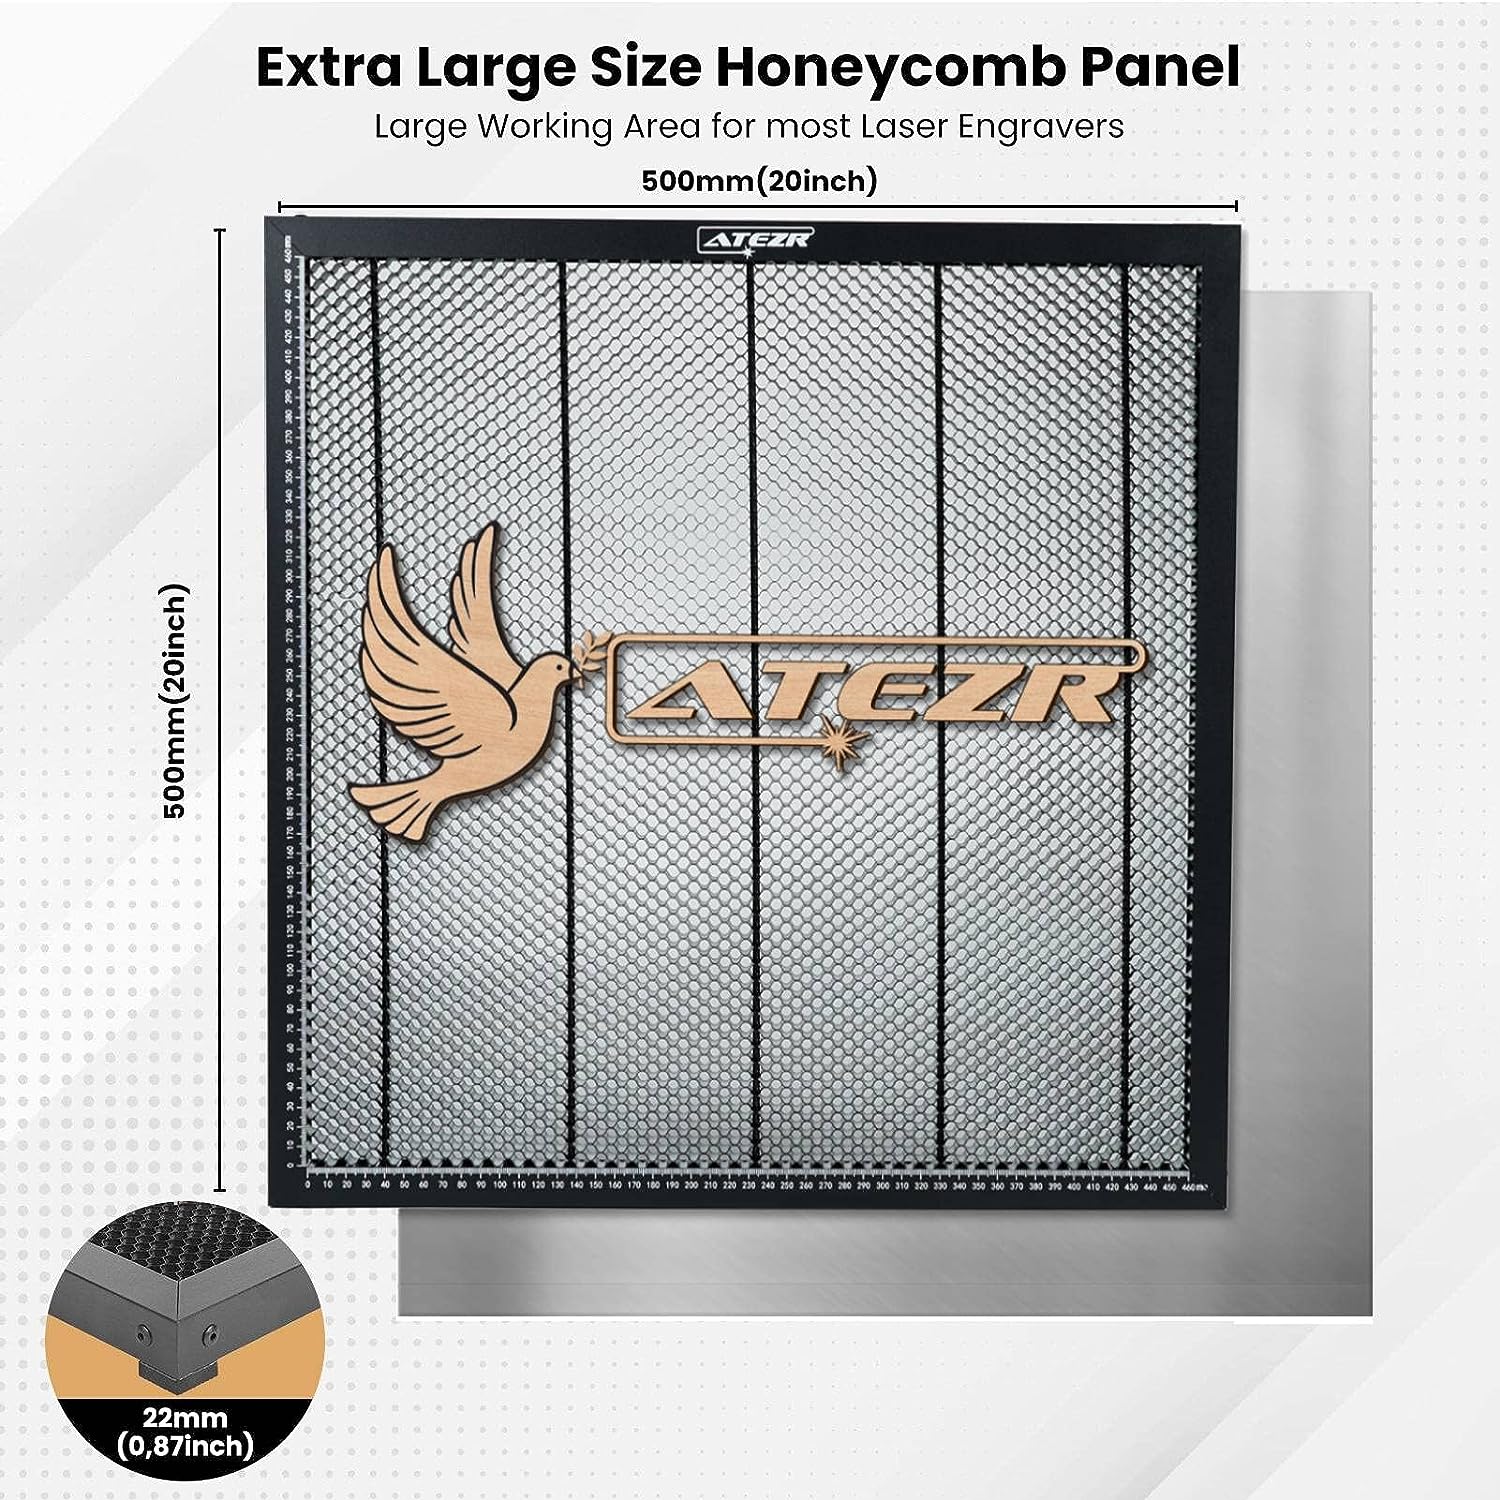 ATEZR Laser Bed Honeycomb Work Table Review